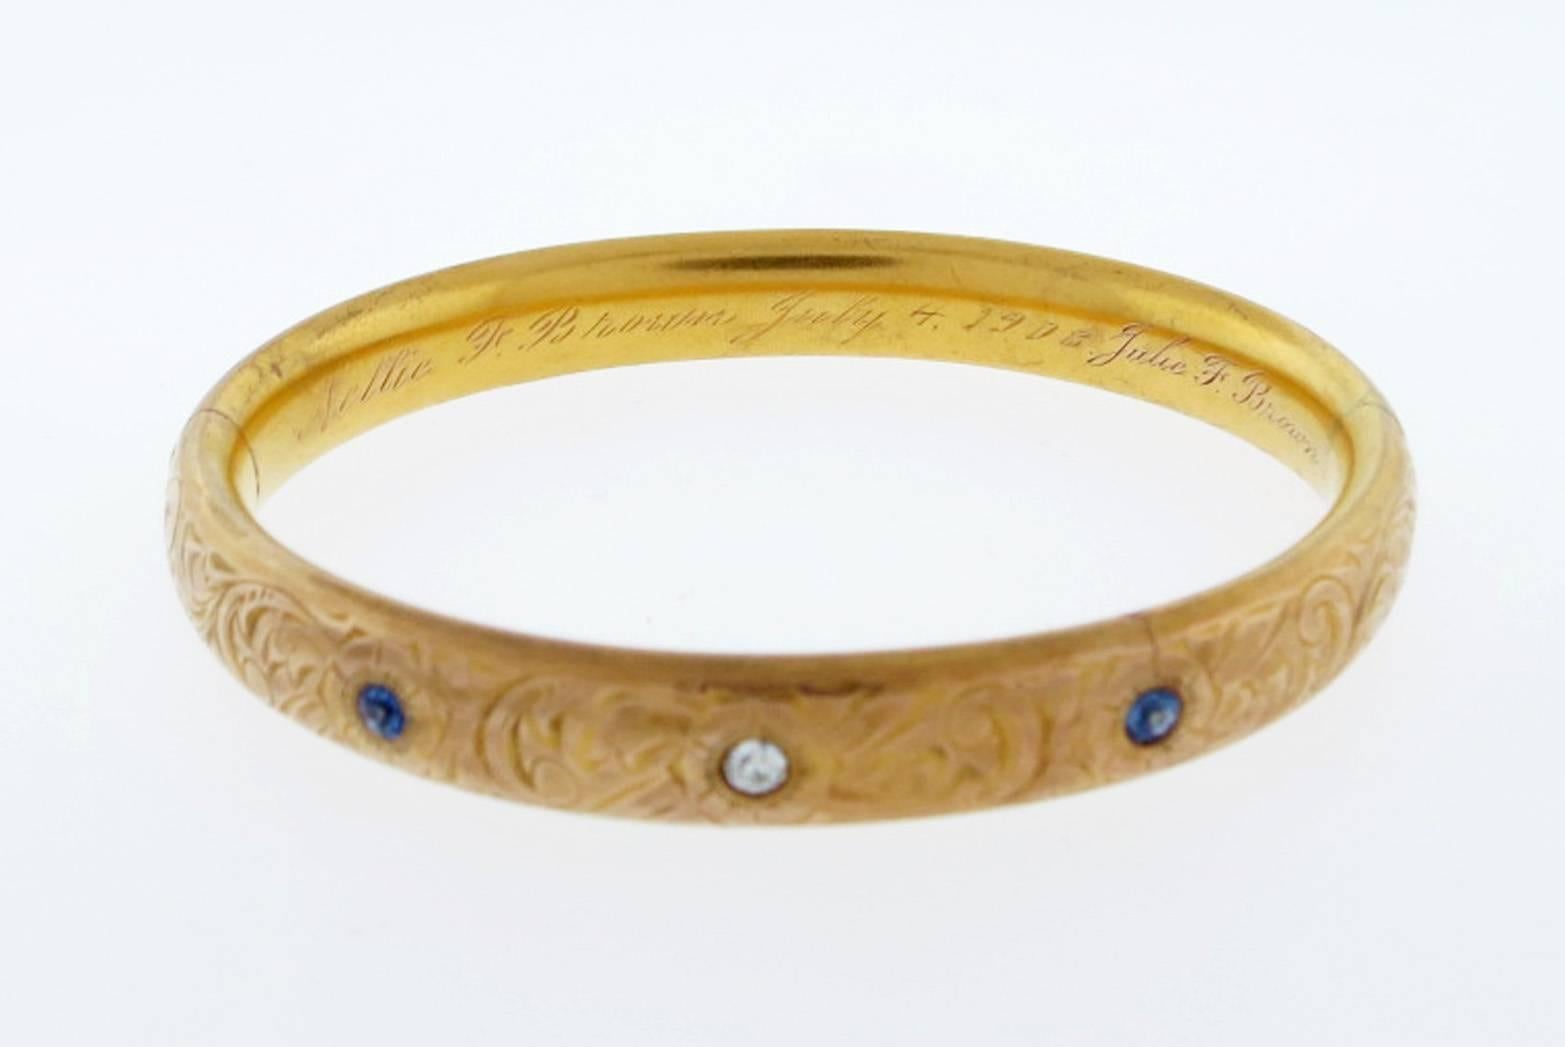 Exceptional condition 14kt. yellow gold engraved hinged bangle bracelet with sapphires and diamond. The center is bead set with a round European cut diamond weighing approx .15cts. set on each side with a natural cornflower blue sapphire totaling